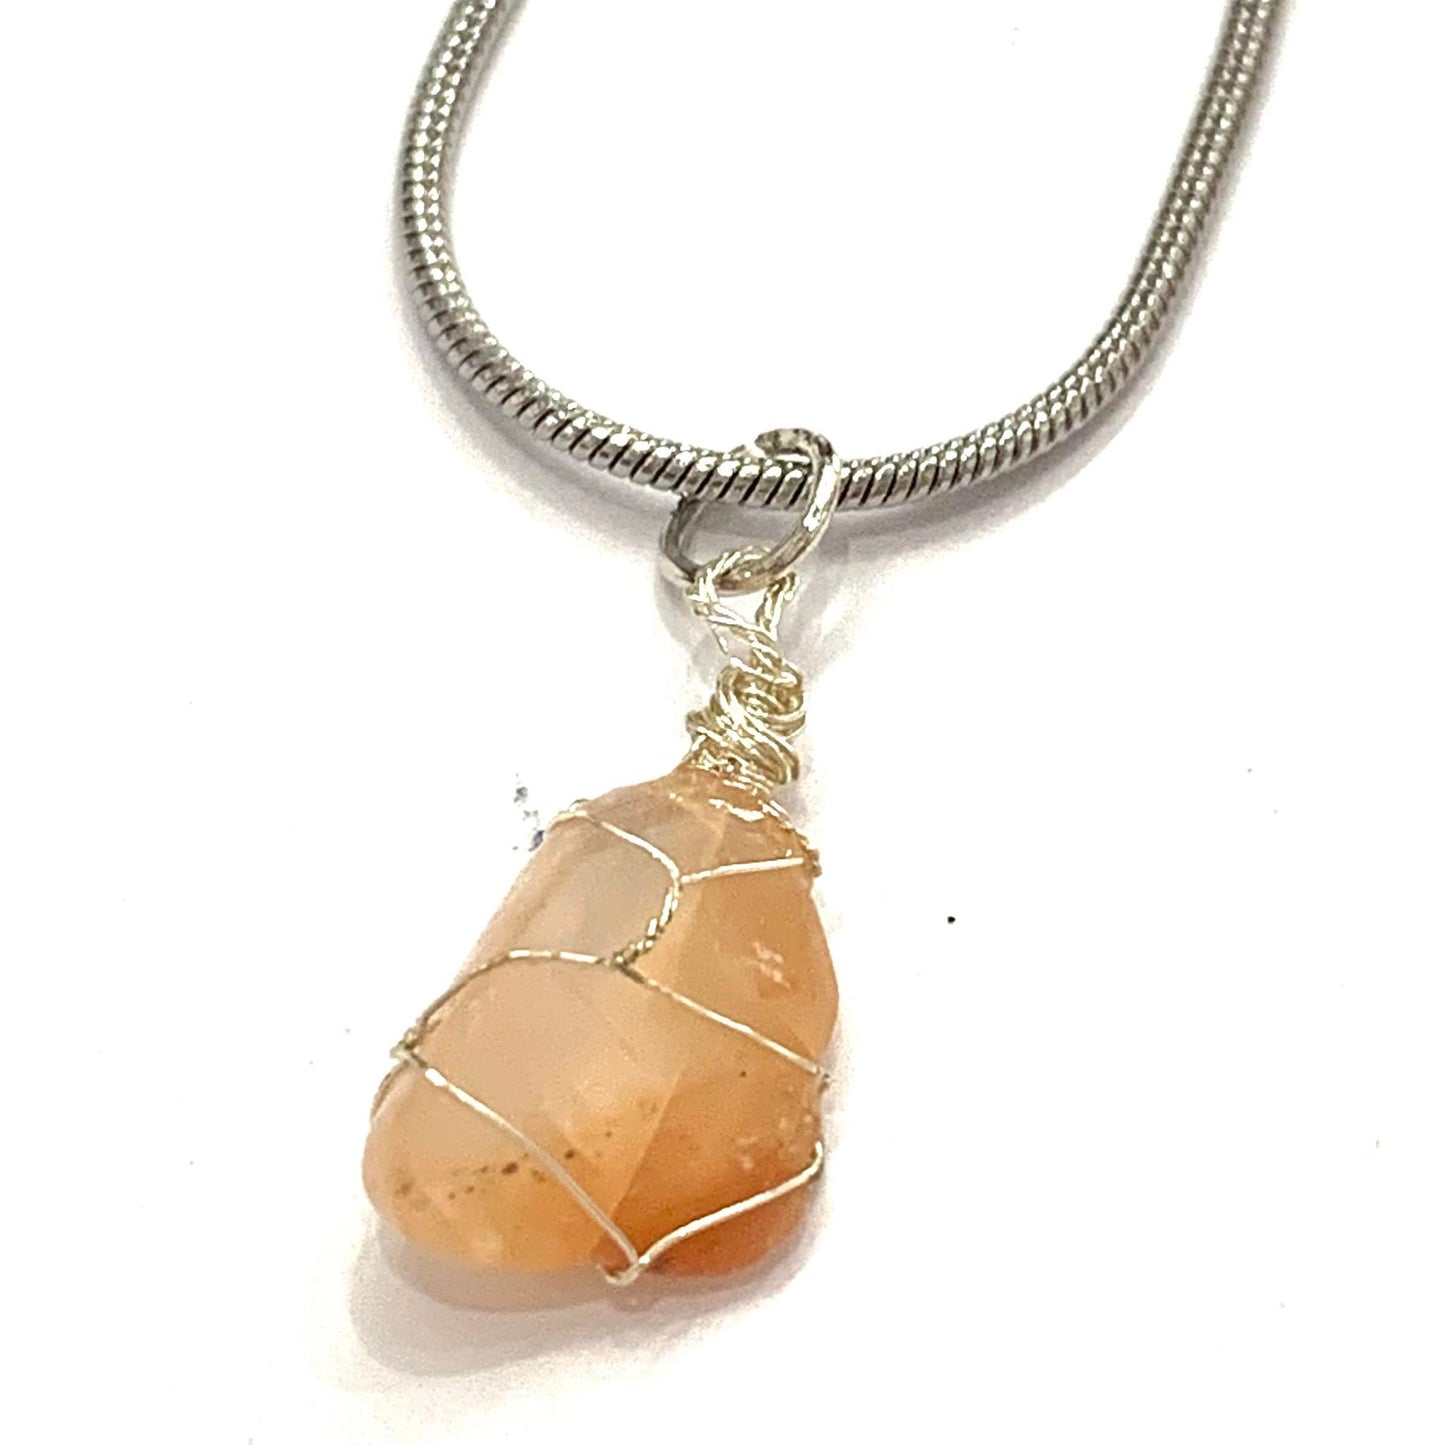 Cosmic Creations - Wrapped Crystal Necklace- Small Strawberry Quartz